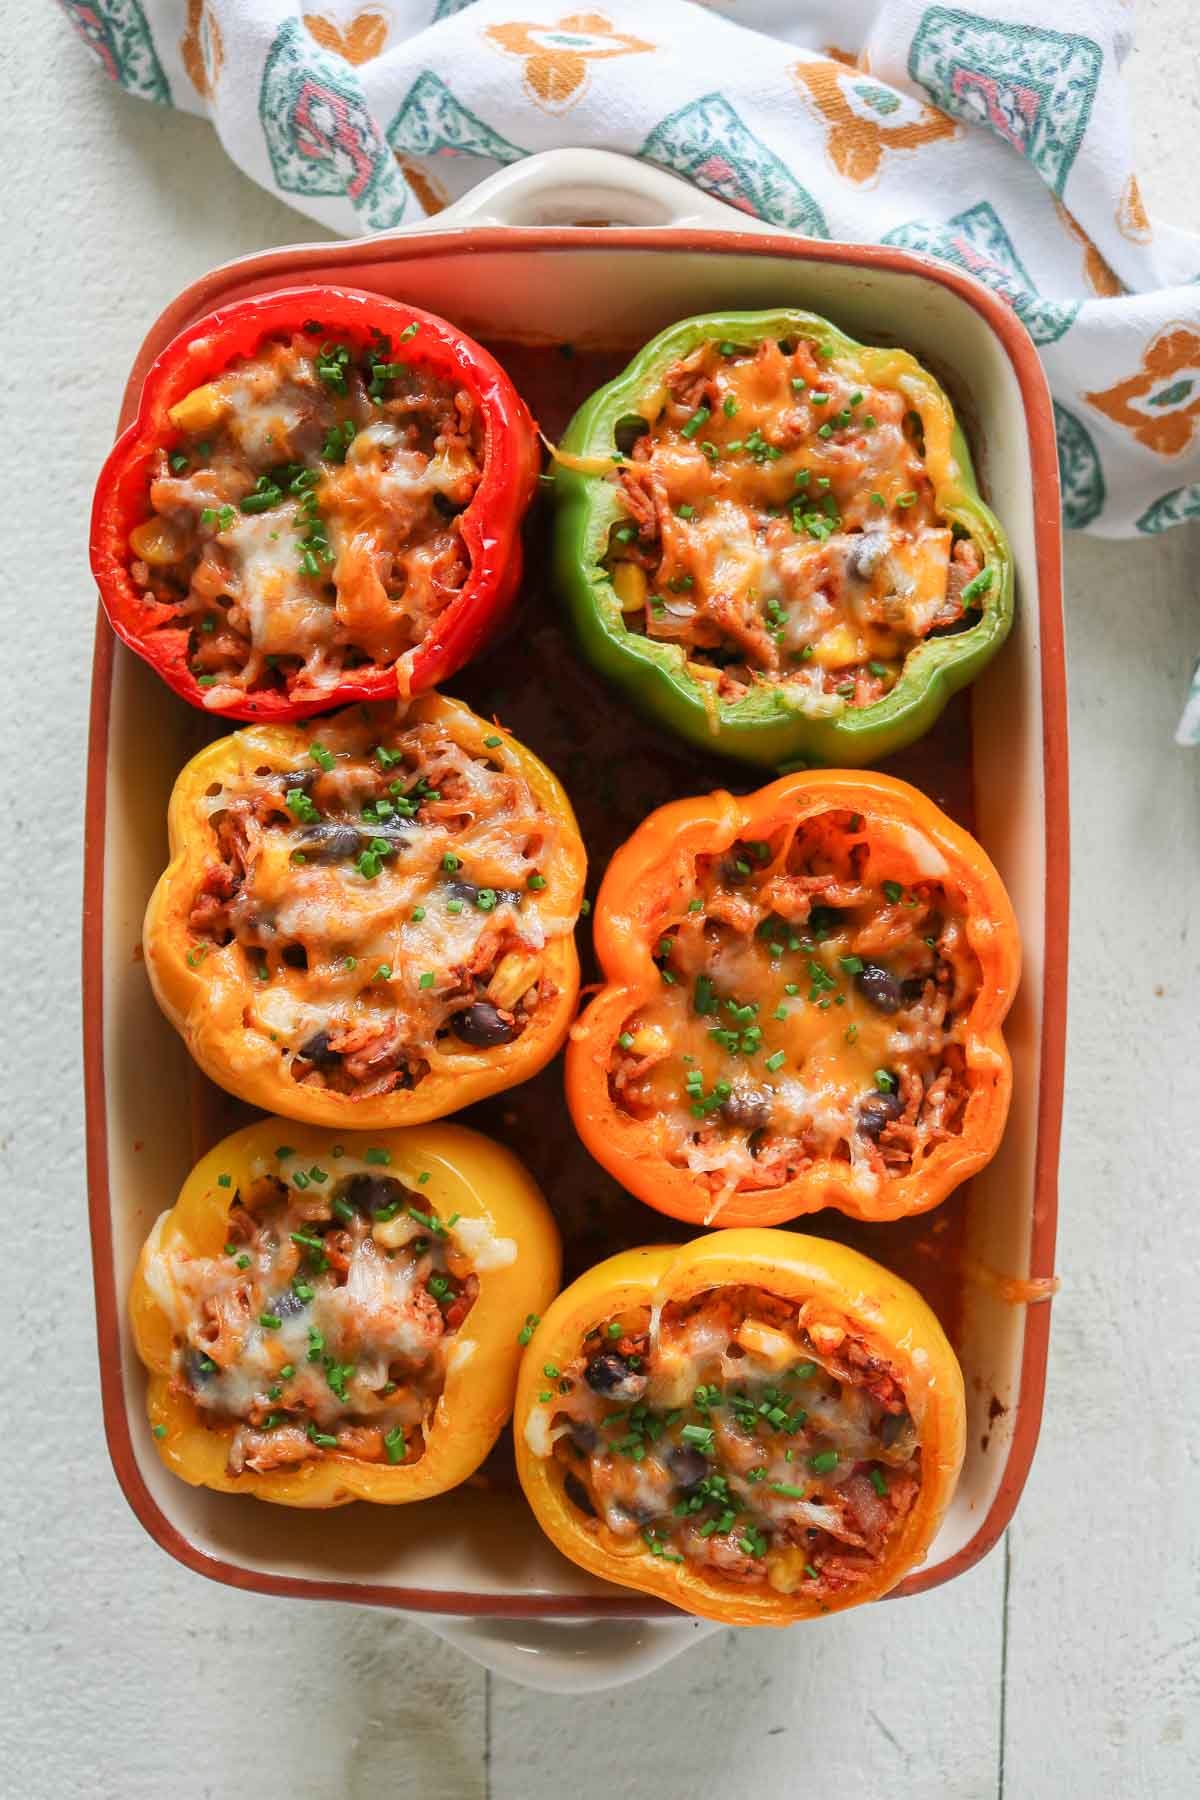 Six baked stuffed peppers in a baking dish garnished with chives.